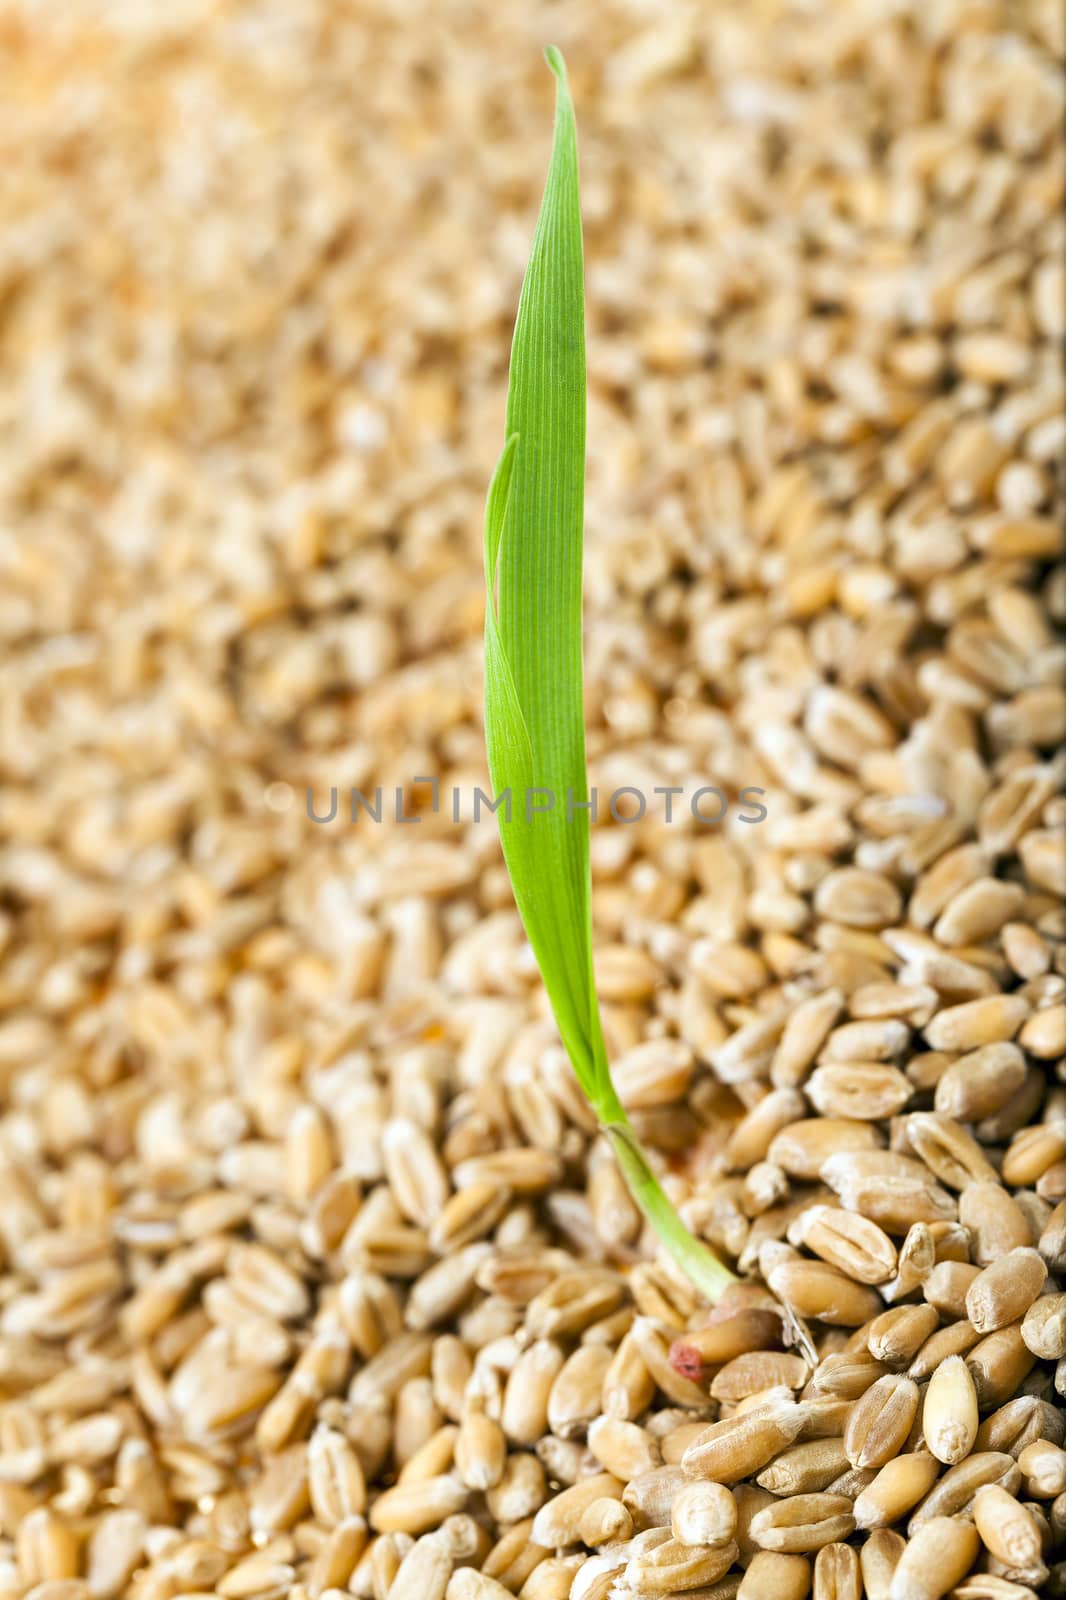   wheat after harvest by avq